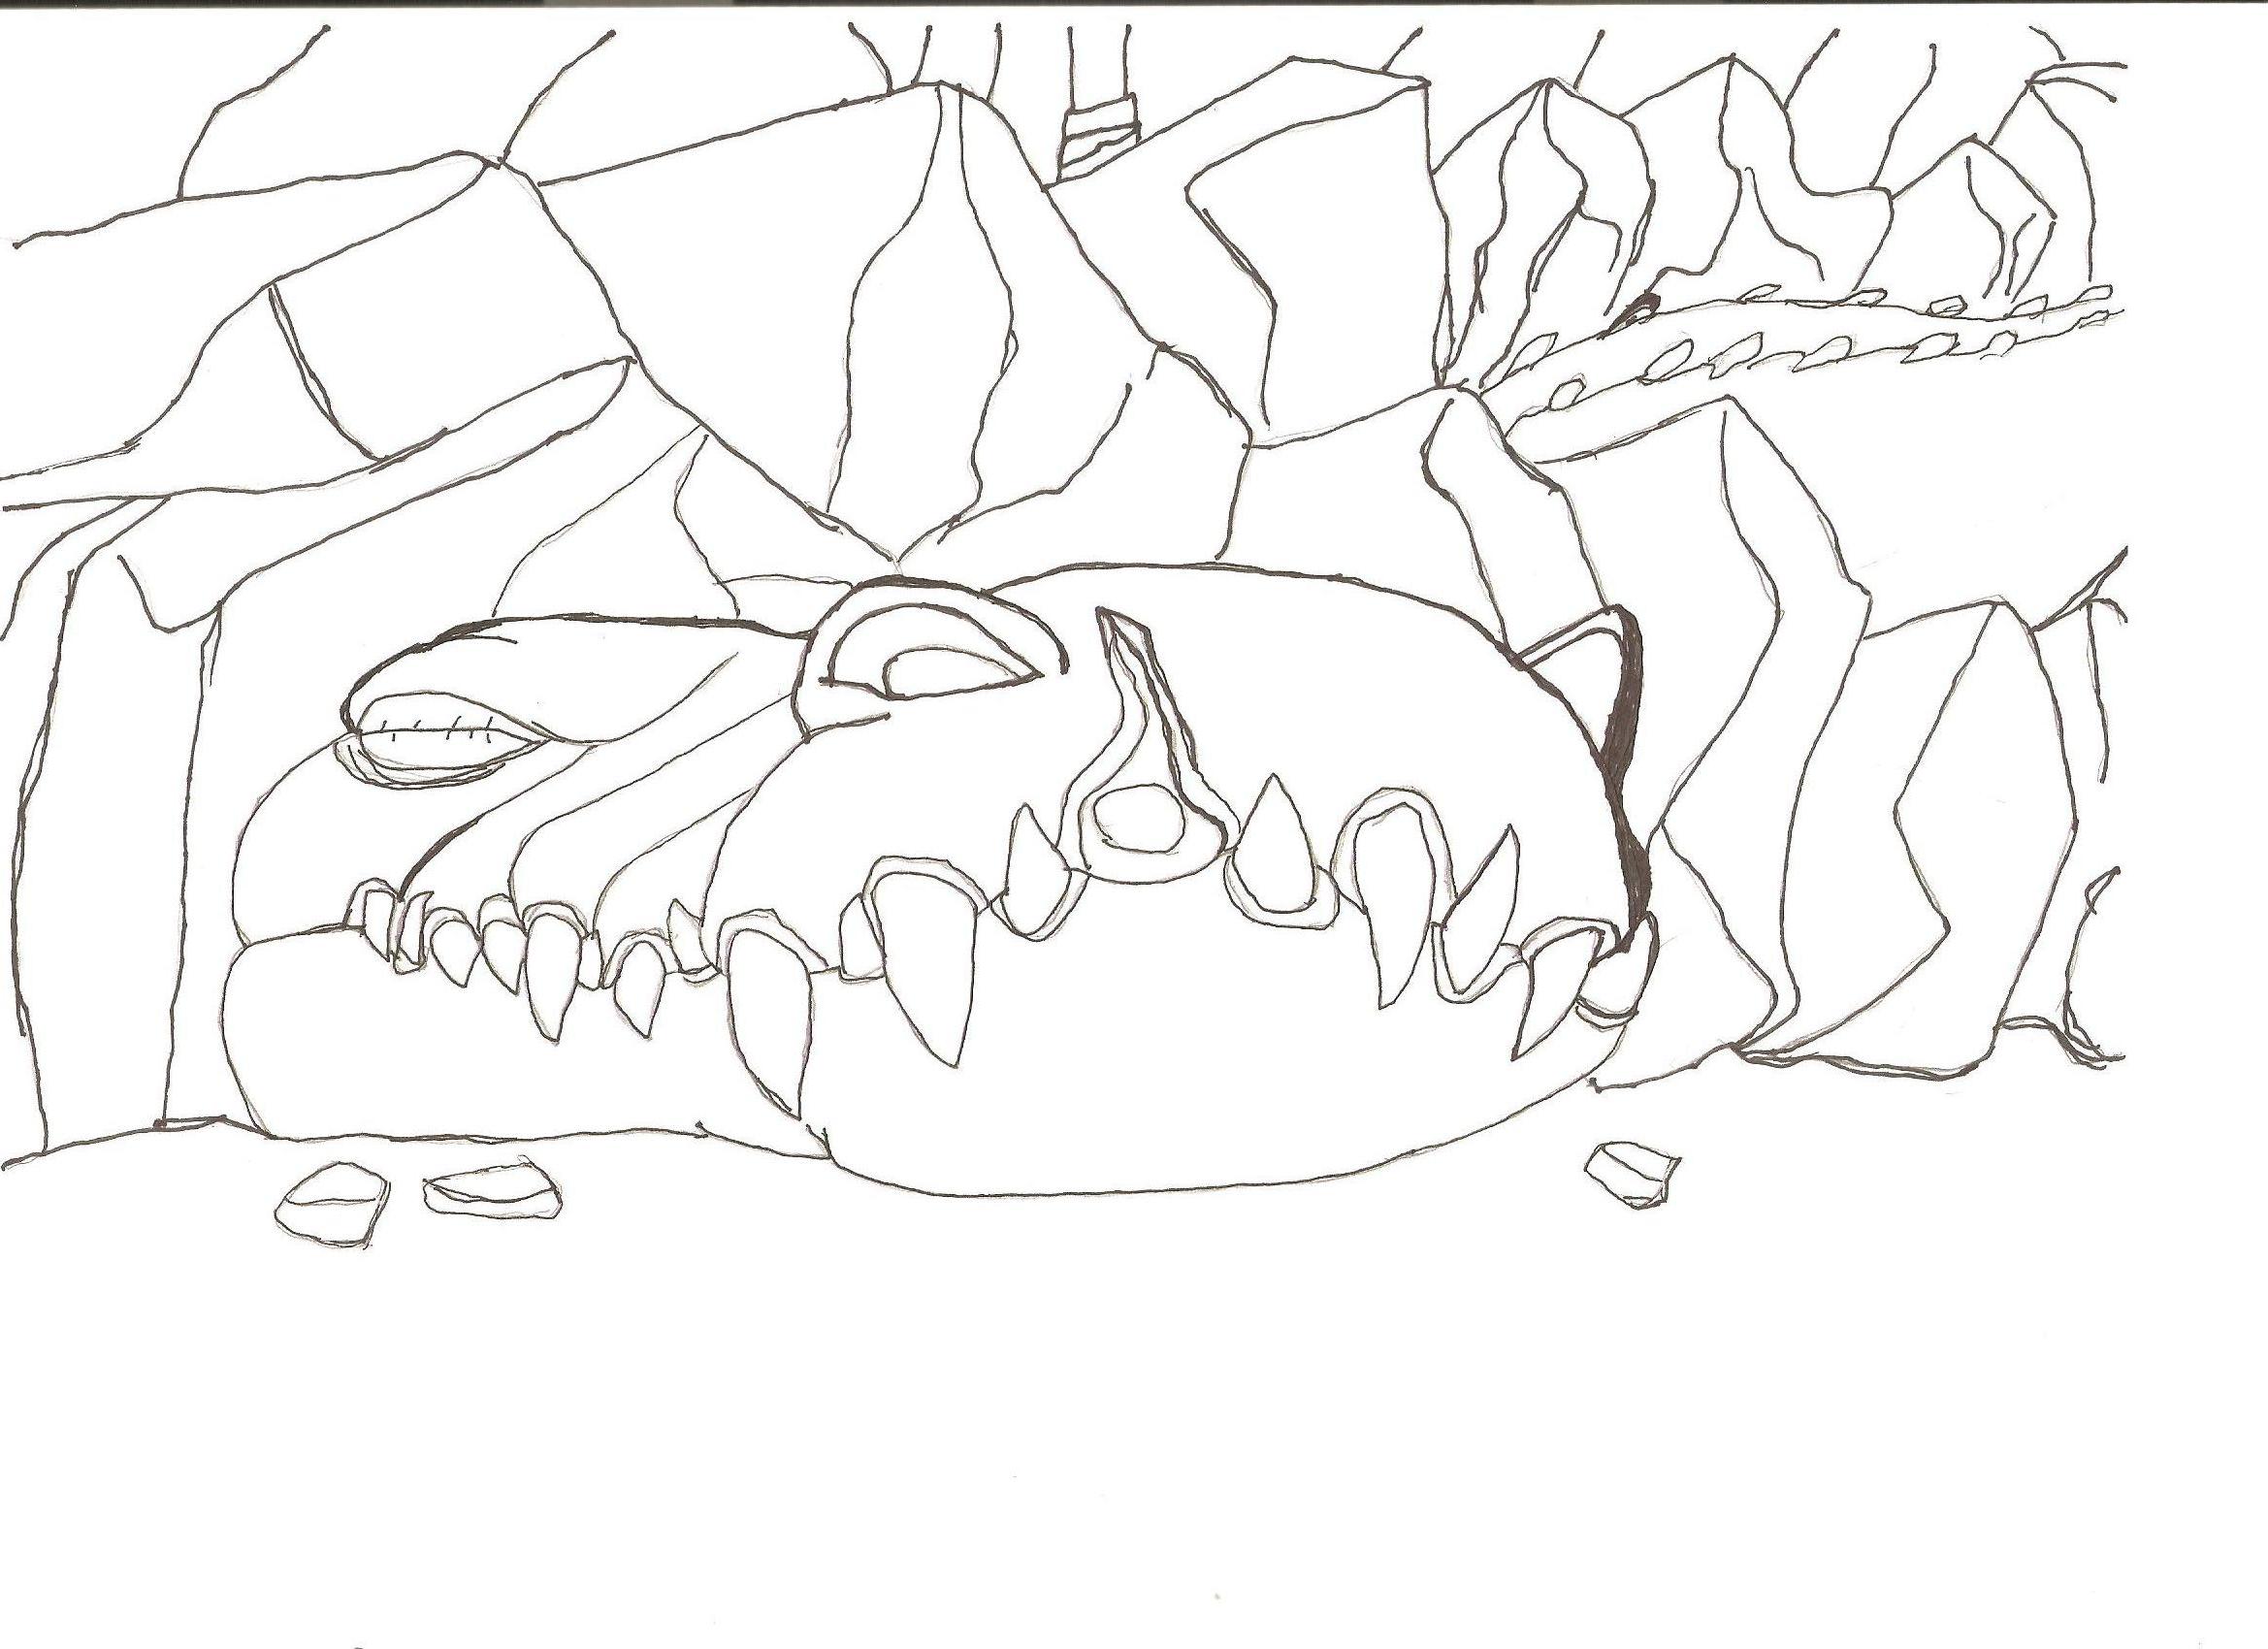 ice age 3 rudy coloring pages - photo #5